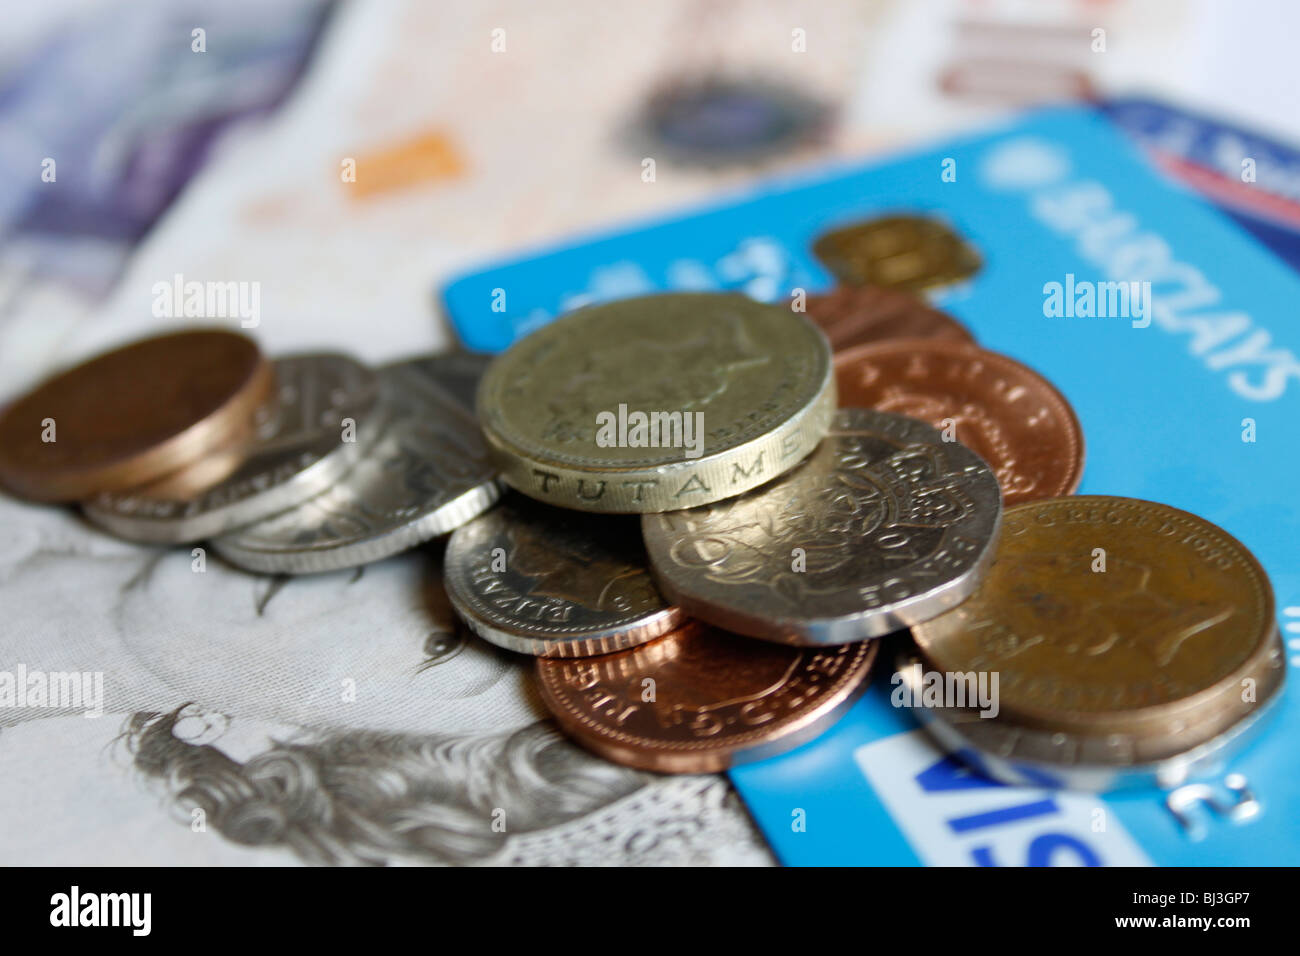 Close up of sterling coins on top of bank cards and sterling notes Stock Photo